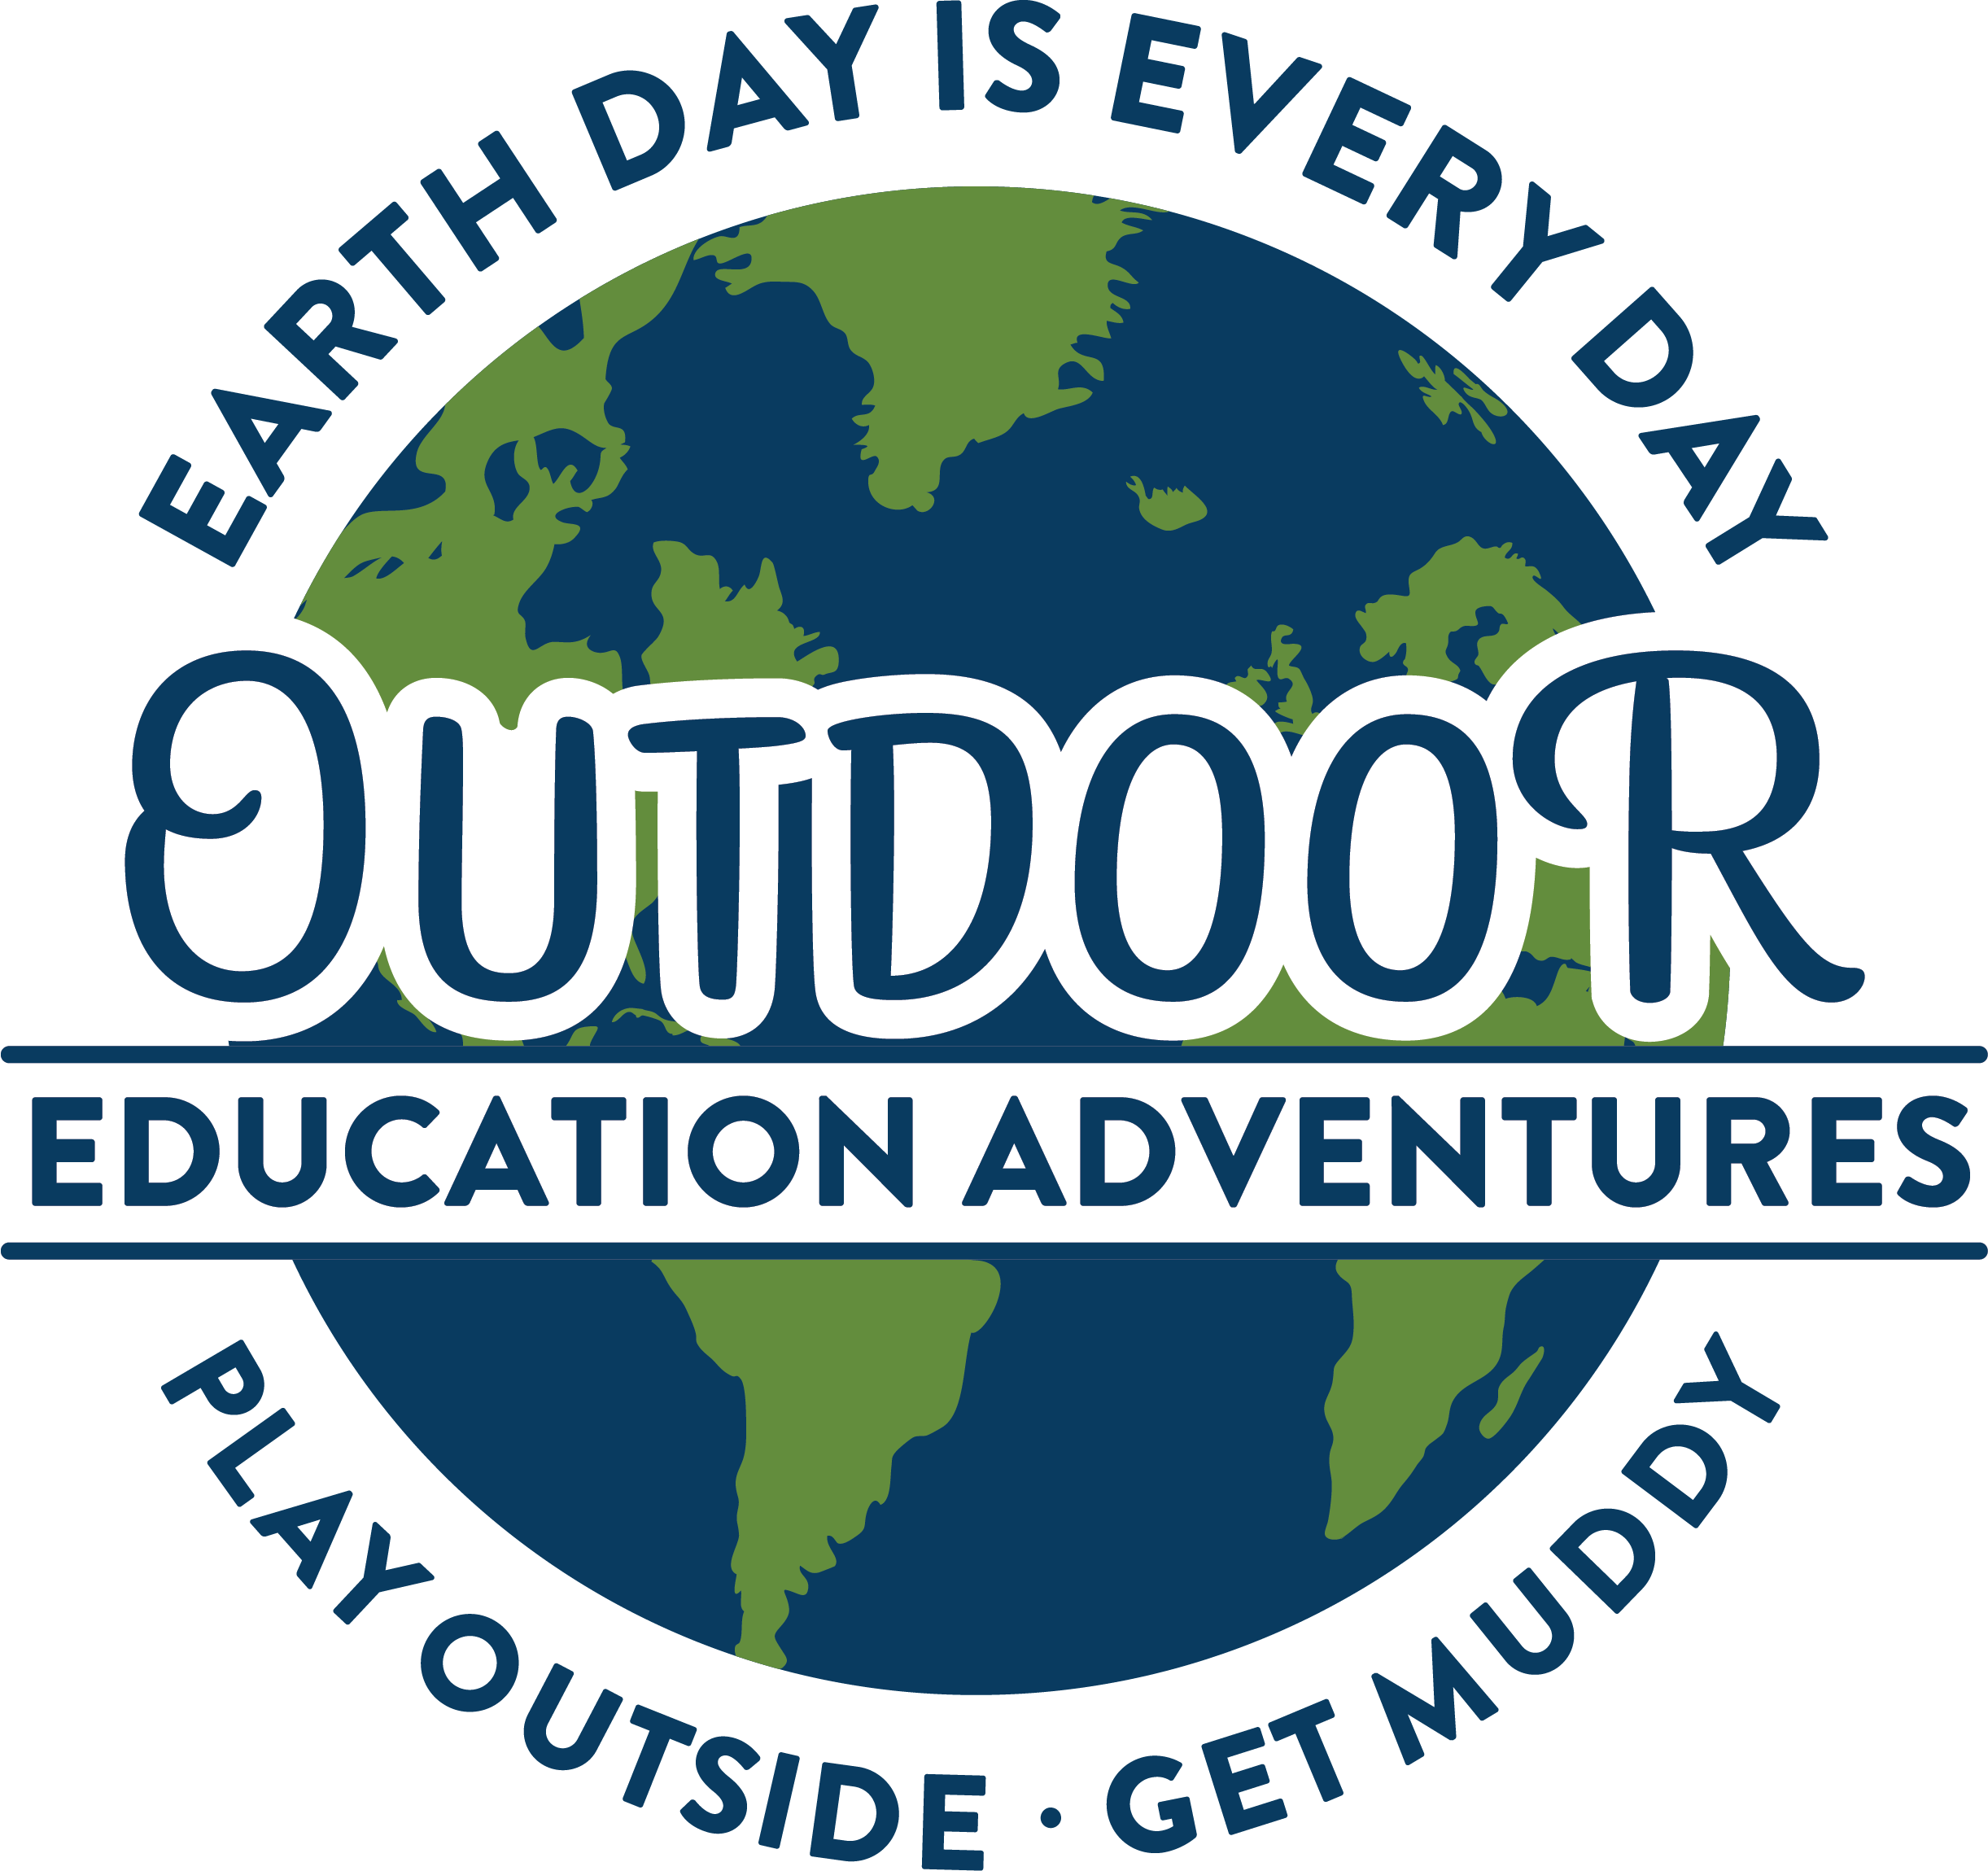 Outdoor Education Adventures, Earth Day is Every Day Logo